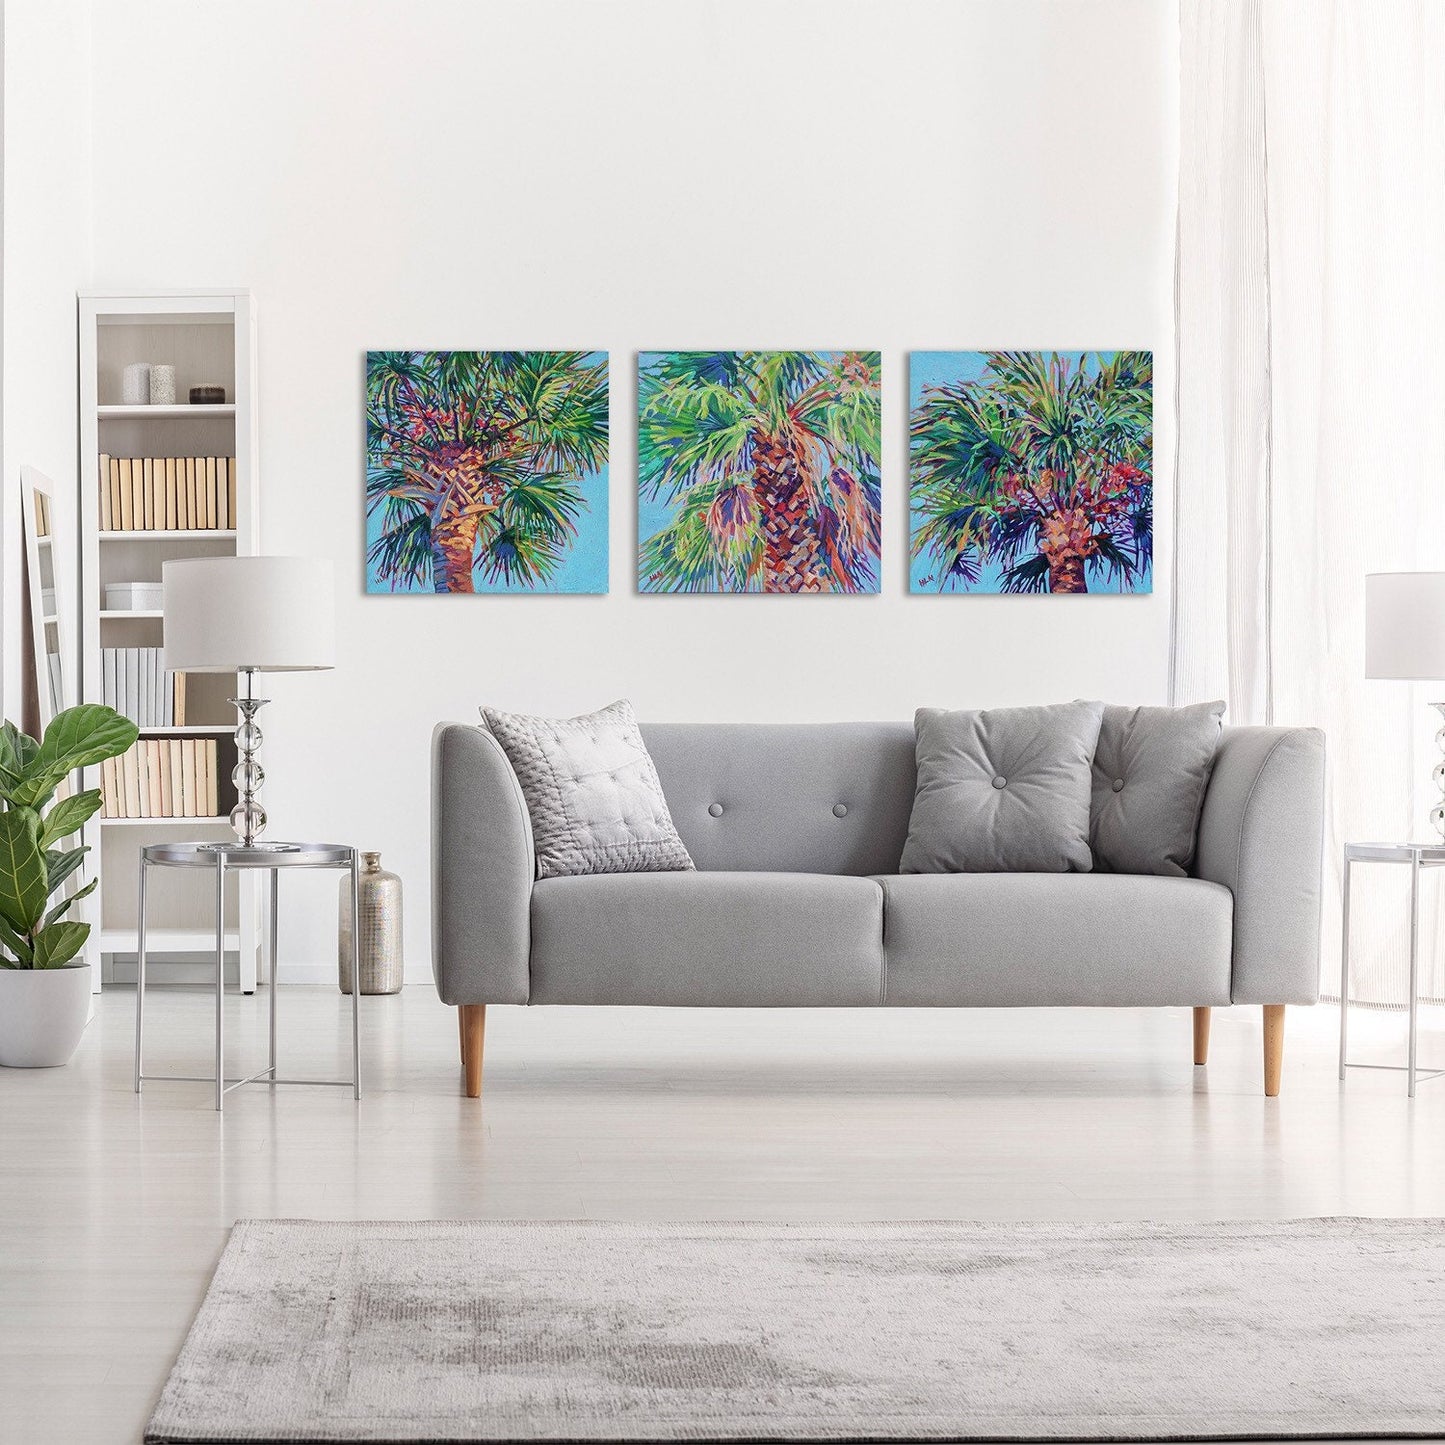 three cabbage palm tree paintings in living room setting